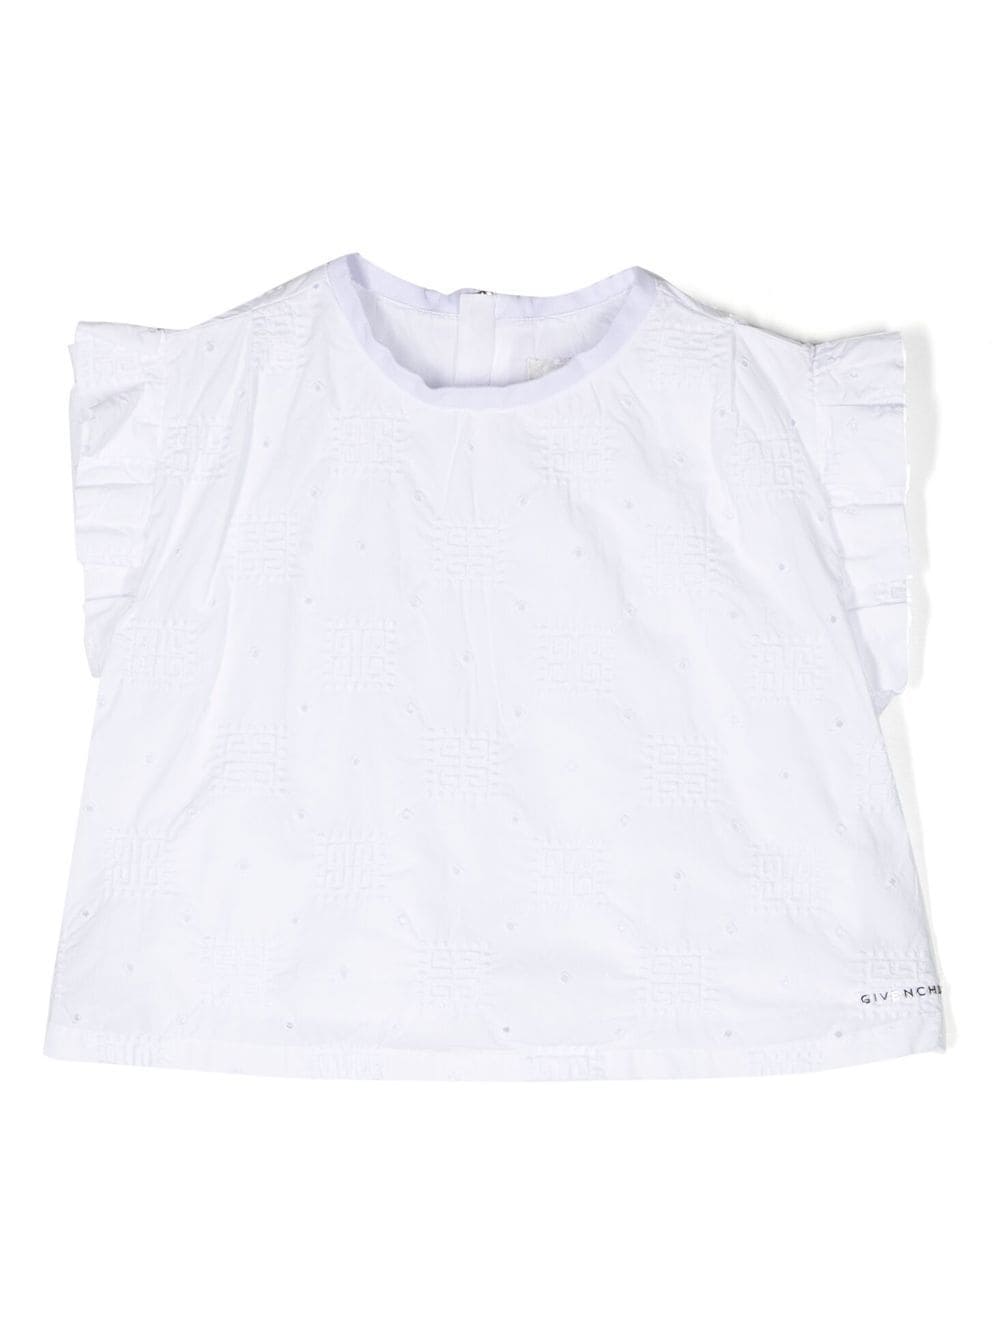 Givenchy Kids 4G broderie anglaise sleeveless blouse - White von Givenchy Kids